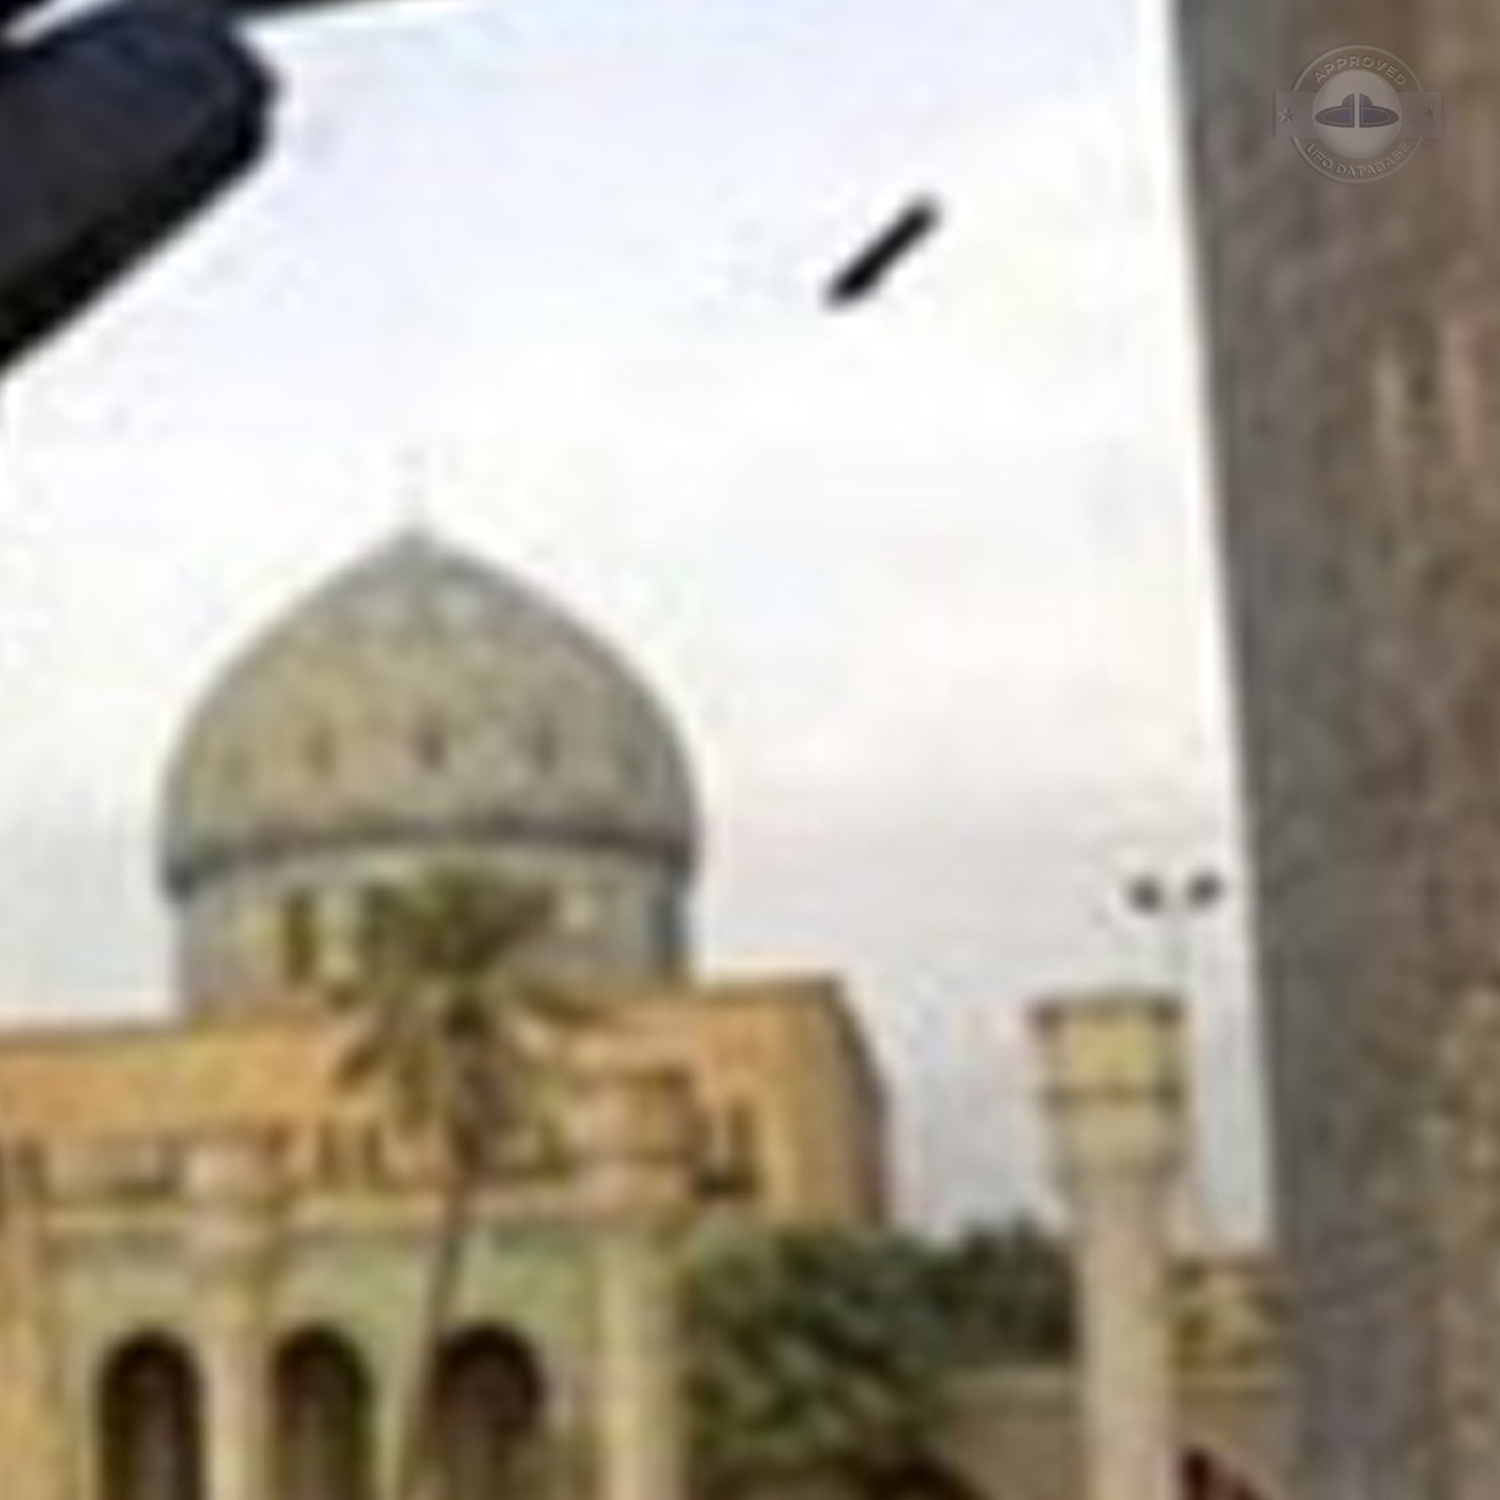 UFO Picture taken while Saddam Hussein statue is falling | Baghdad UFO Picture #183-3